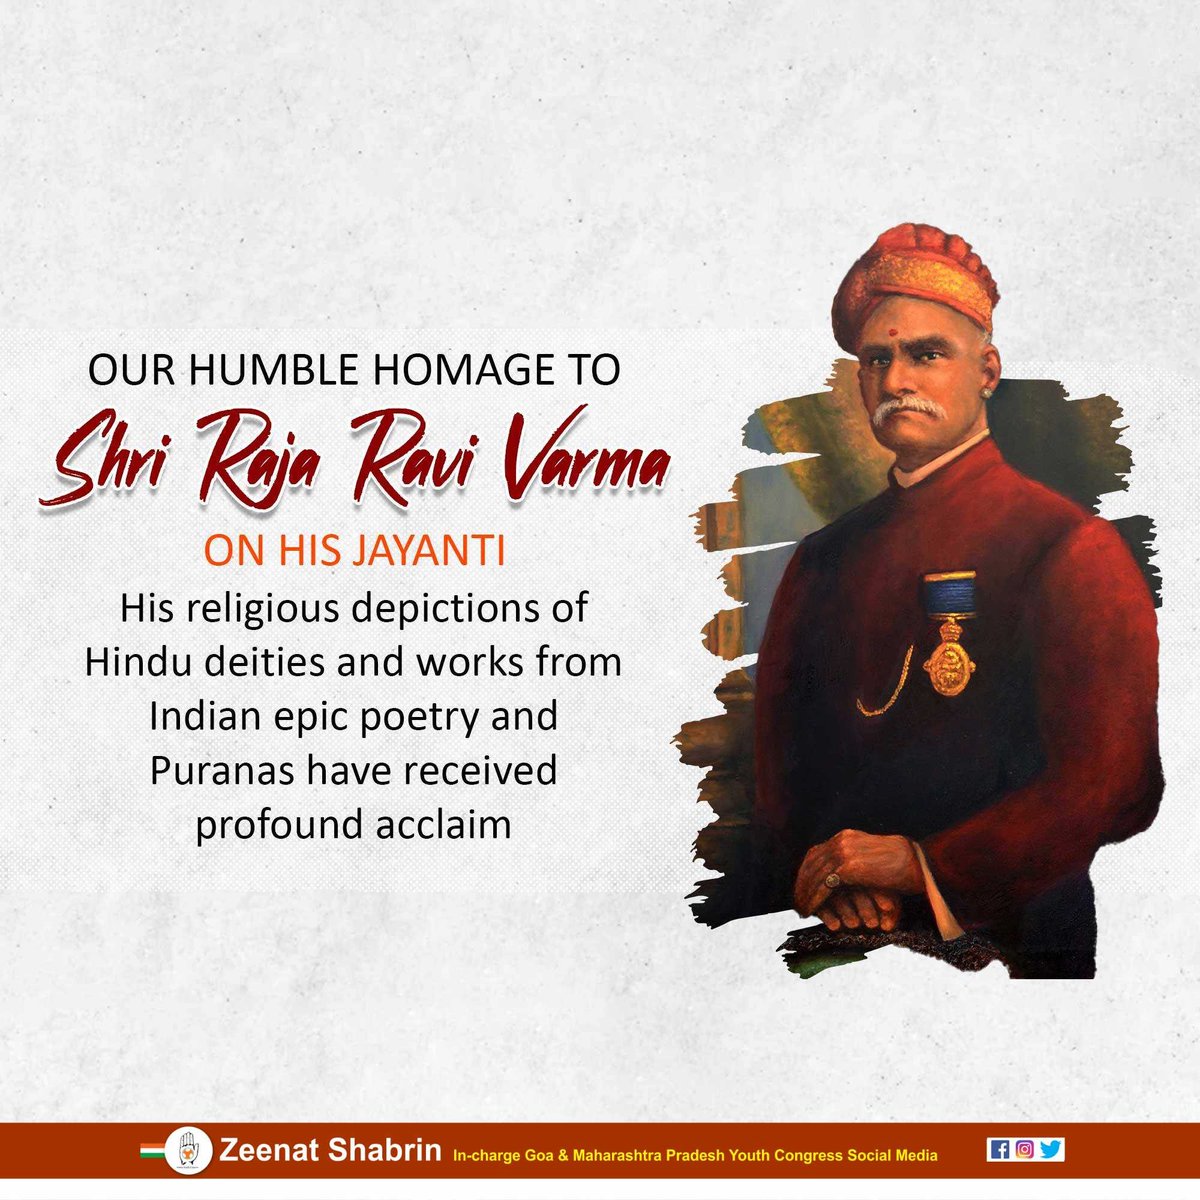 Remembering the legendary painter who brought Indian art to the world stage.

#RajaRaviVarma